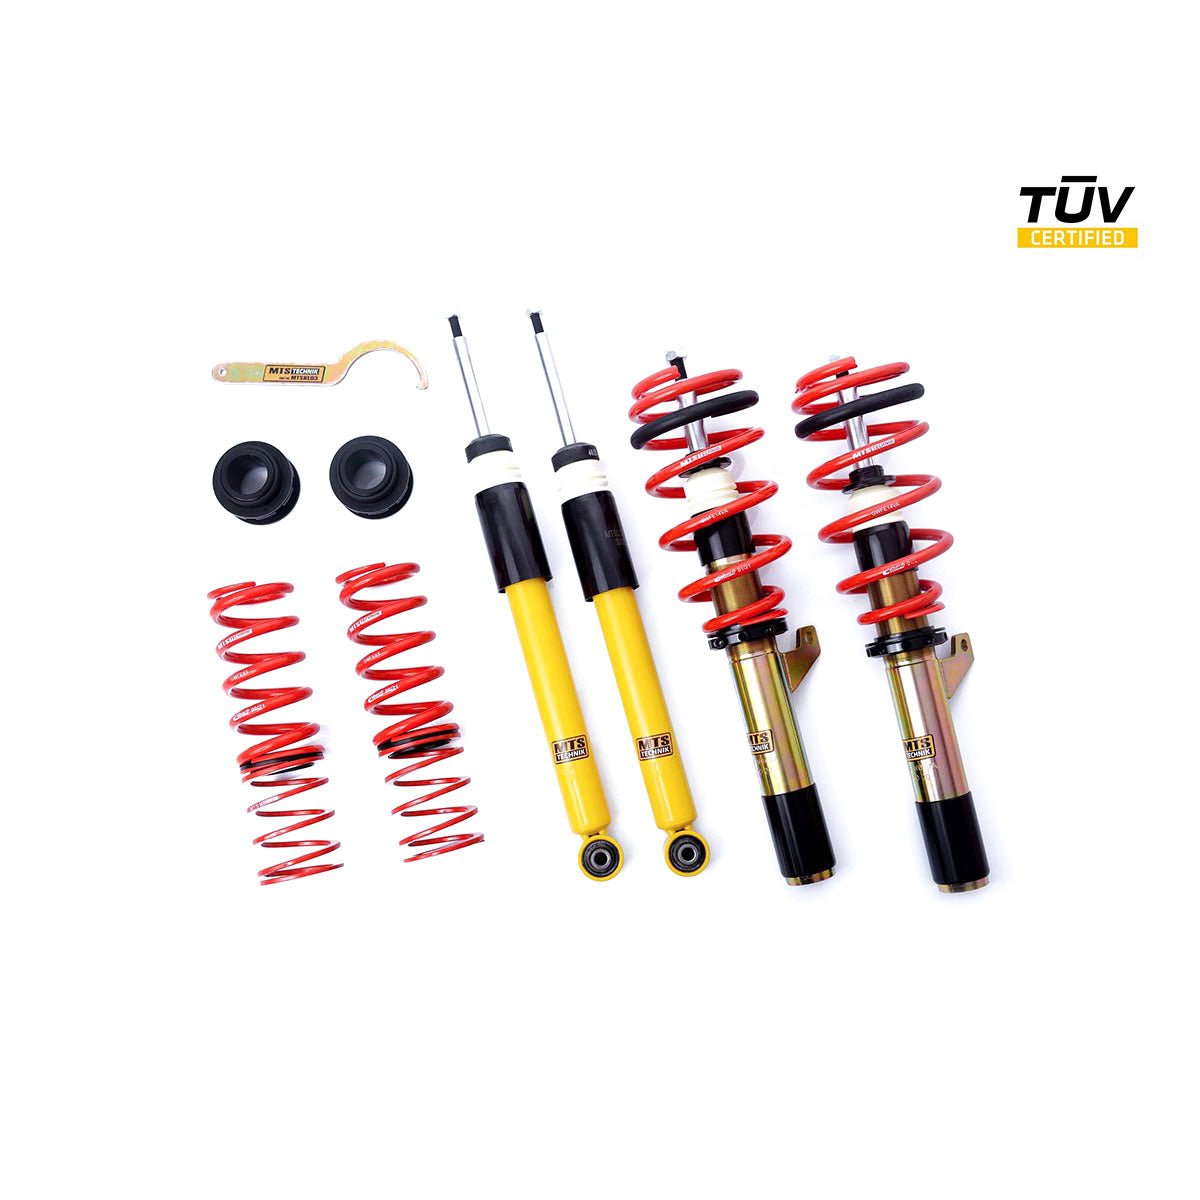 MTS TECHNIK coilover kit STREET Audi A3 8Y Sportback (with TÜV) - PARTS33 GmbH